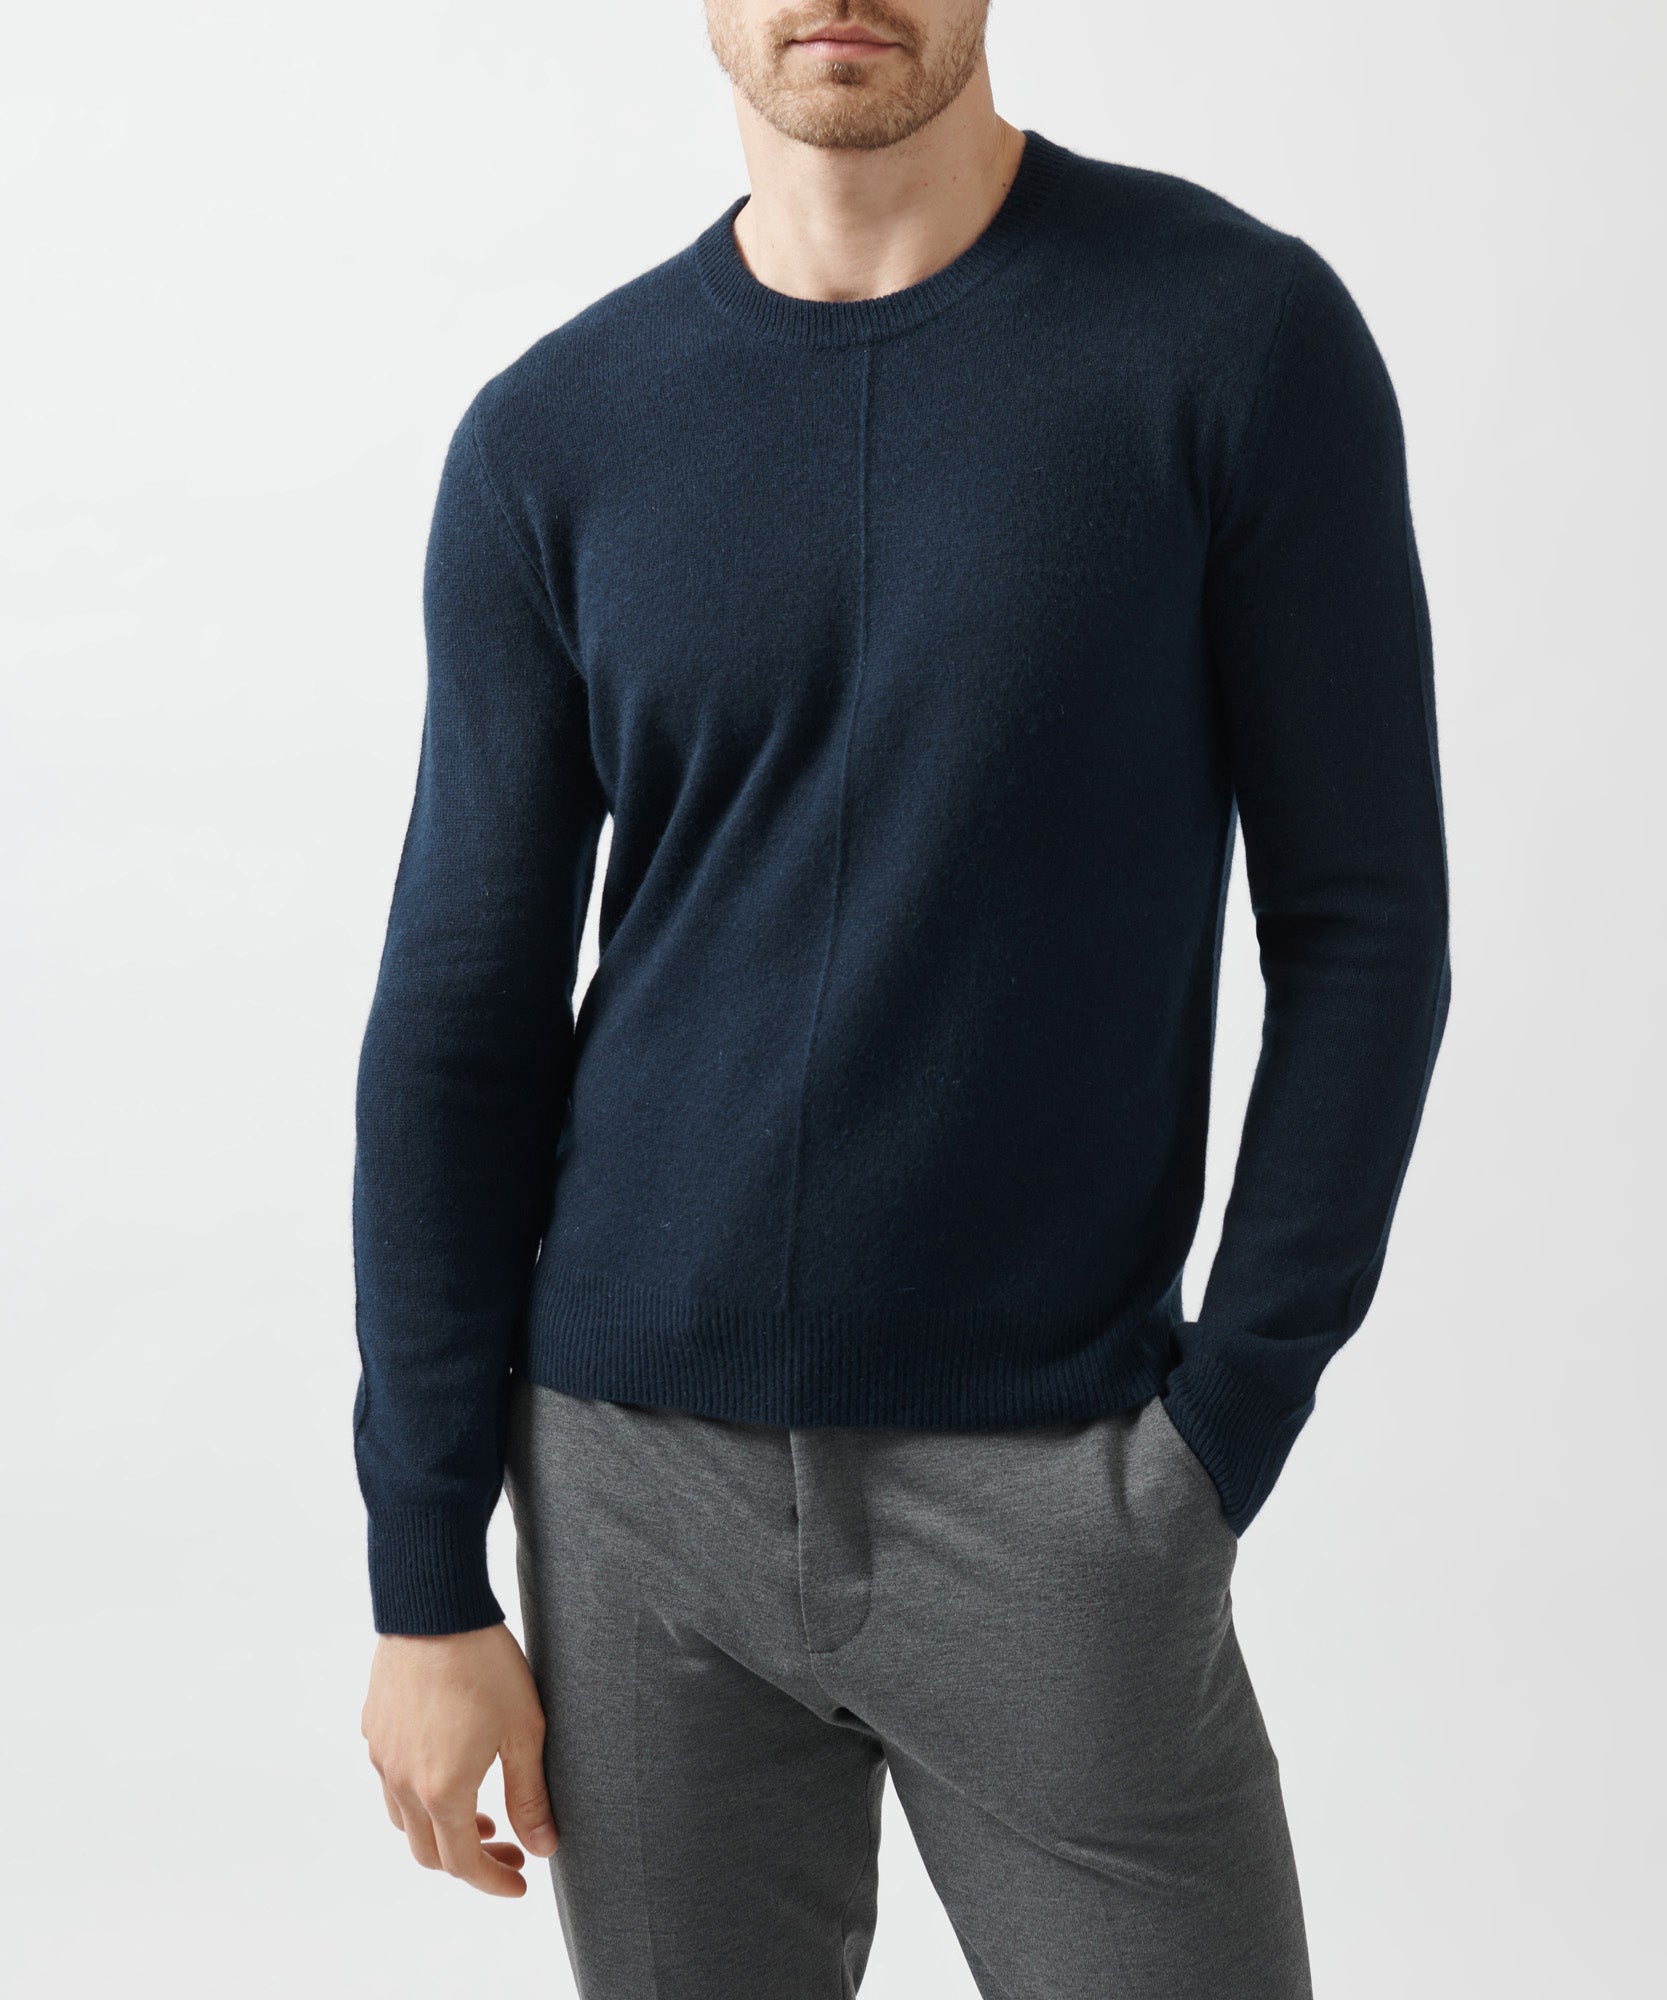 Recycled Cashmere Exposed Seam Crew Neck Sweater - Midnight